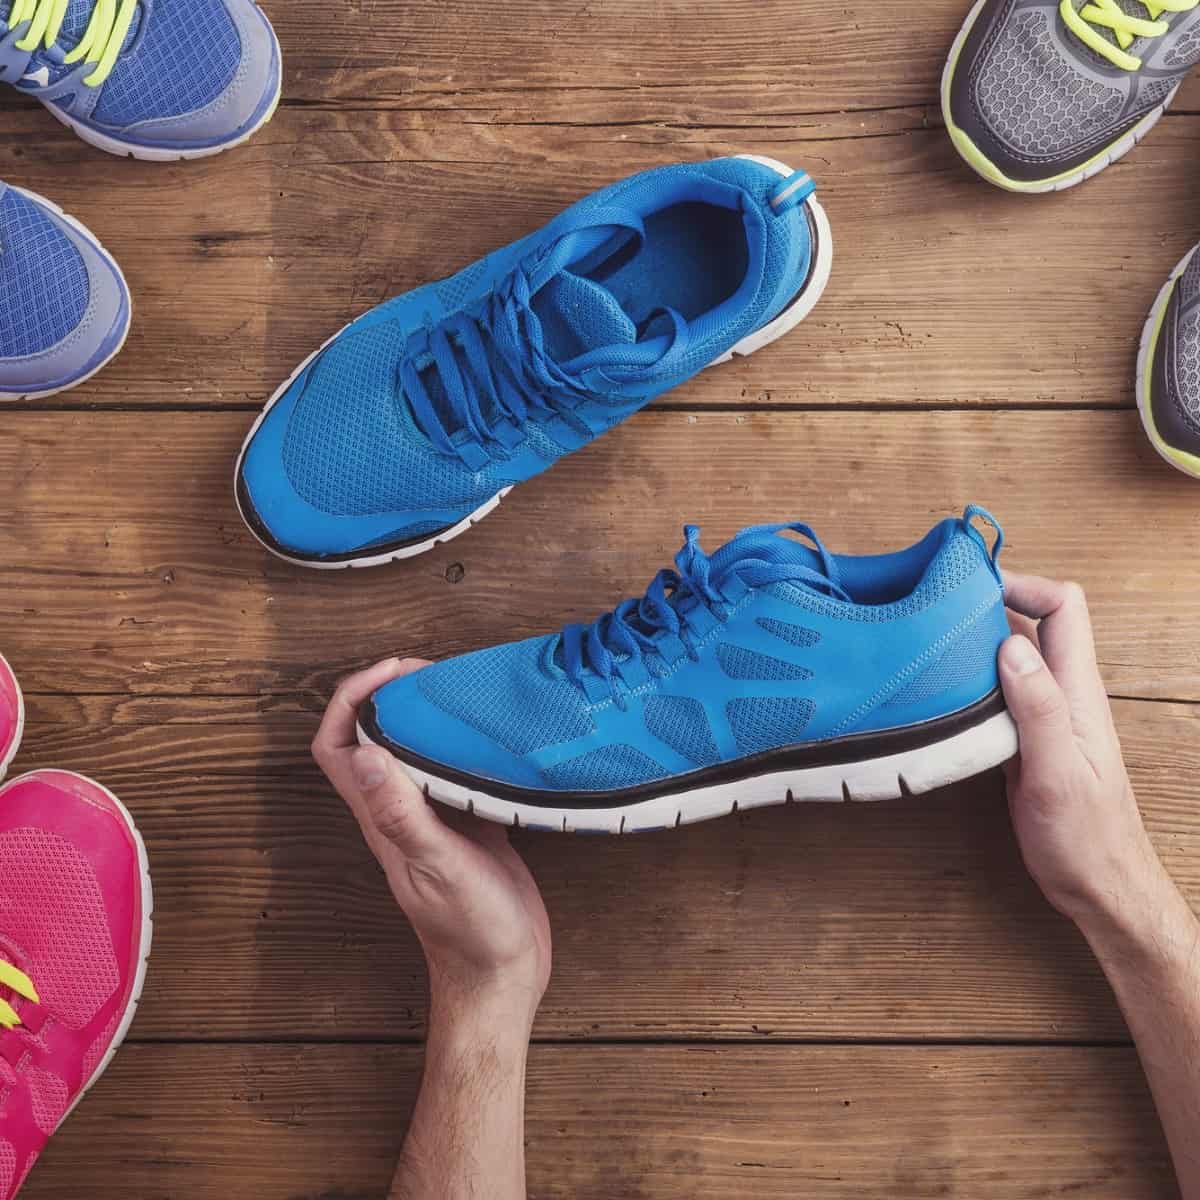 Are Memory Foam Shoes Good for Running? (Surprising Facts)